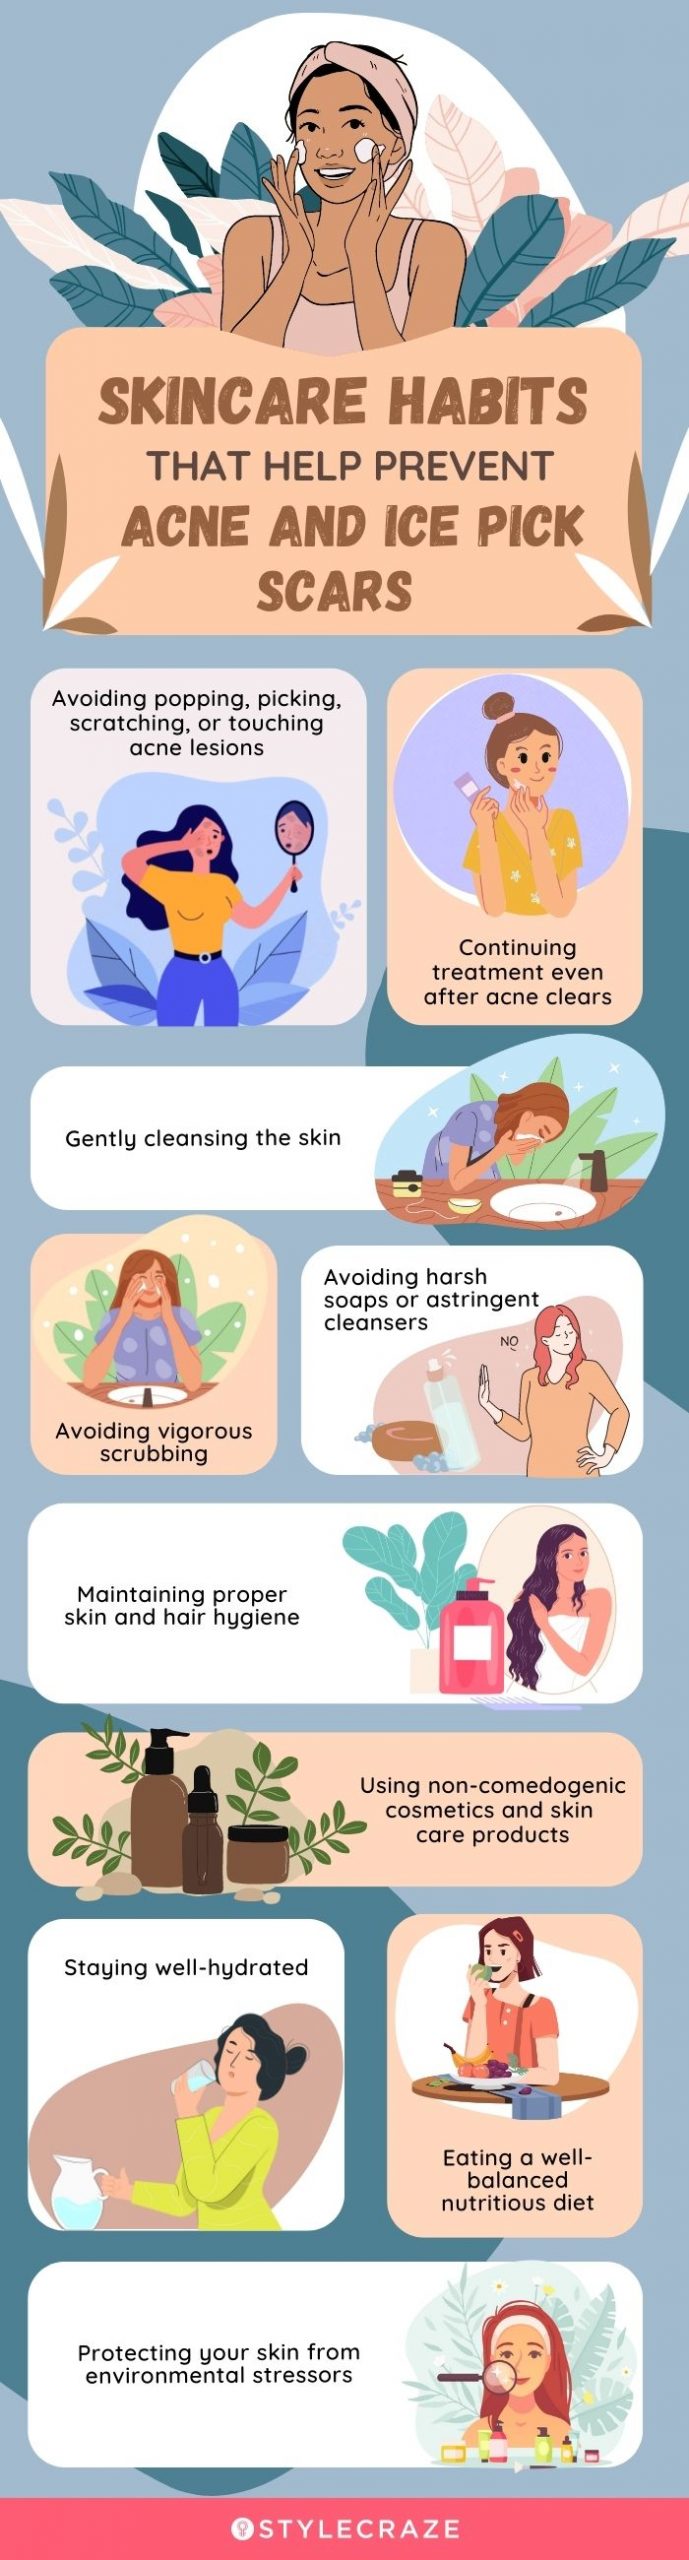 skincare habits that help prevent acne and ice pick scars [infographic]